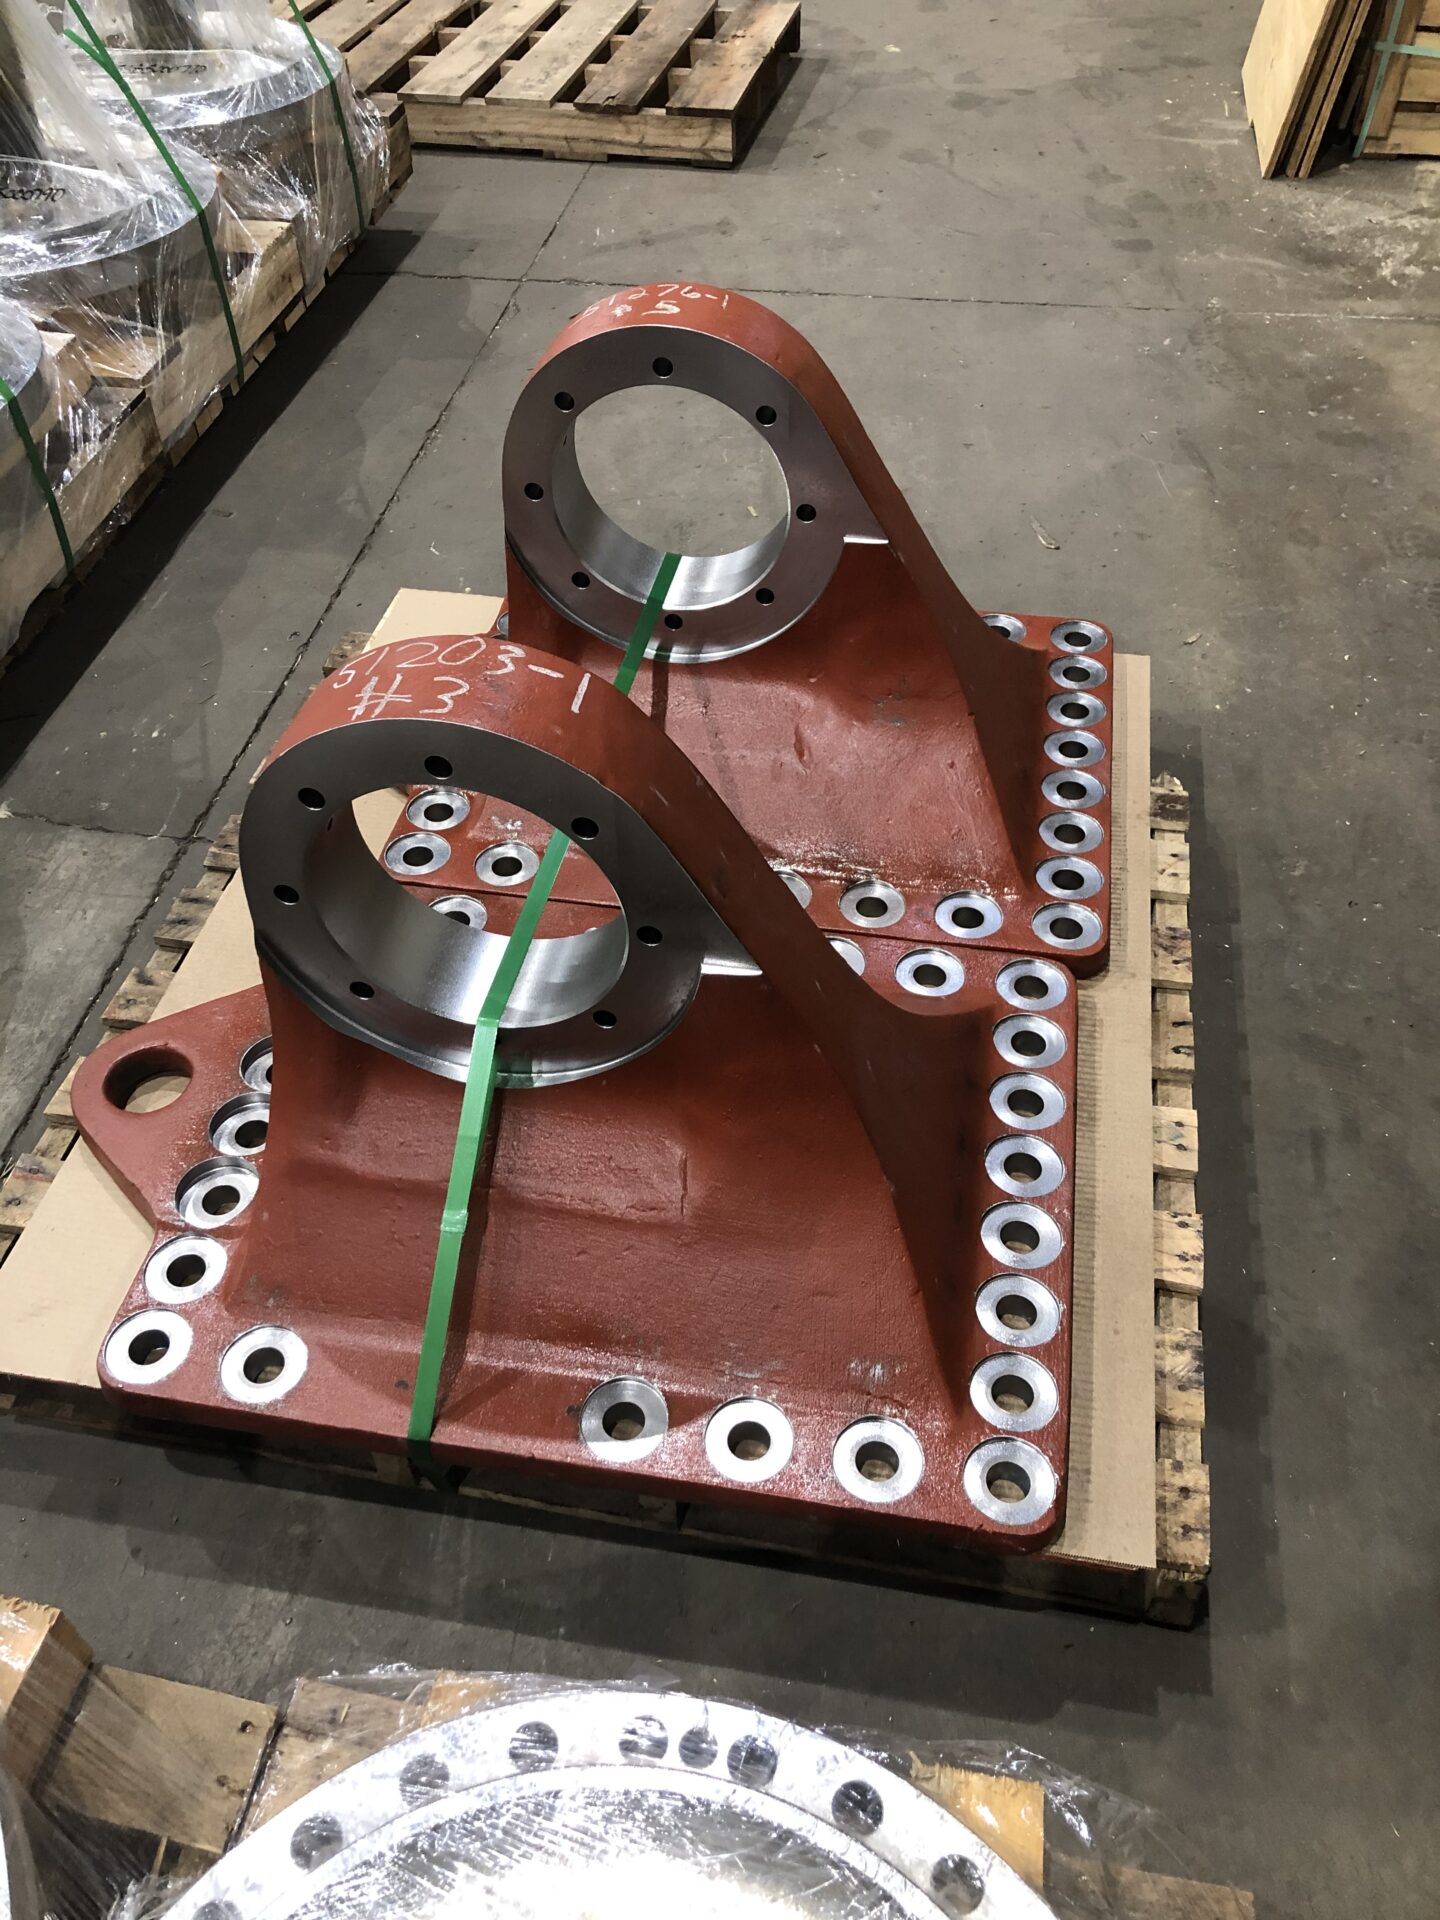 A pair of large metal parts sitting on top of a pallet.